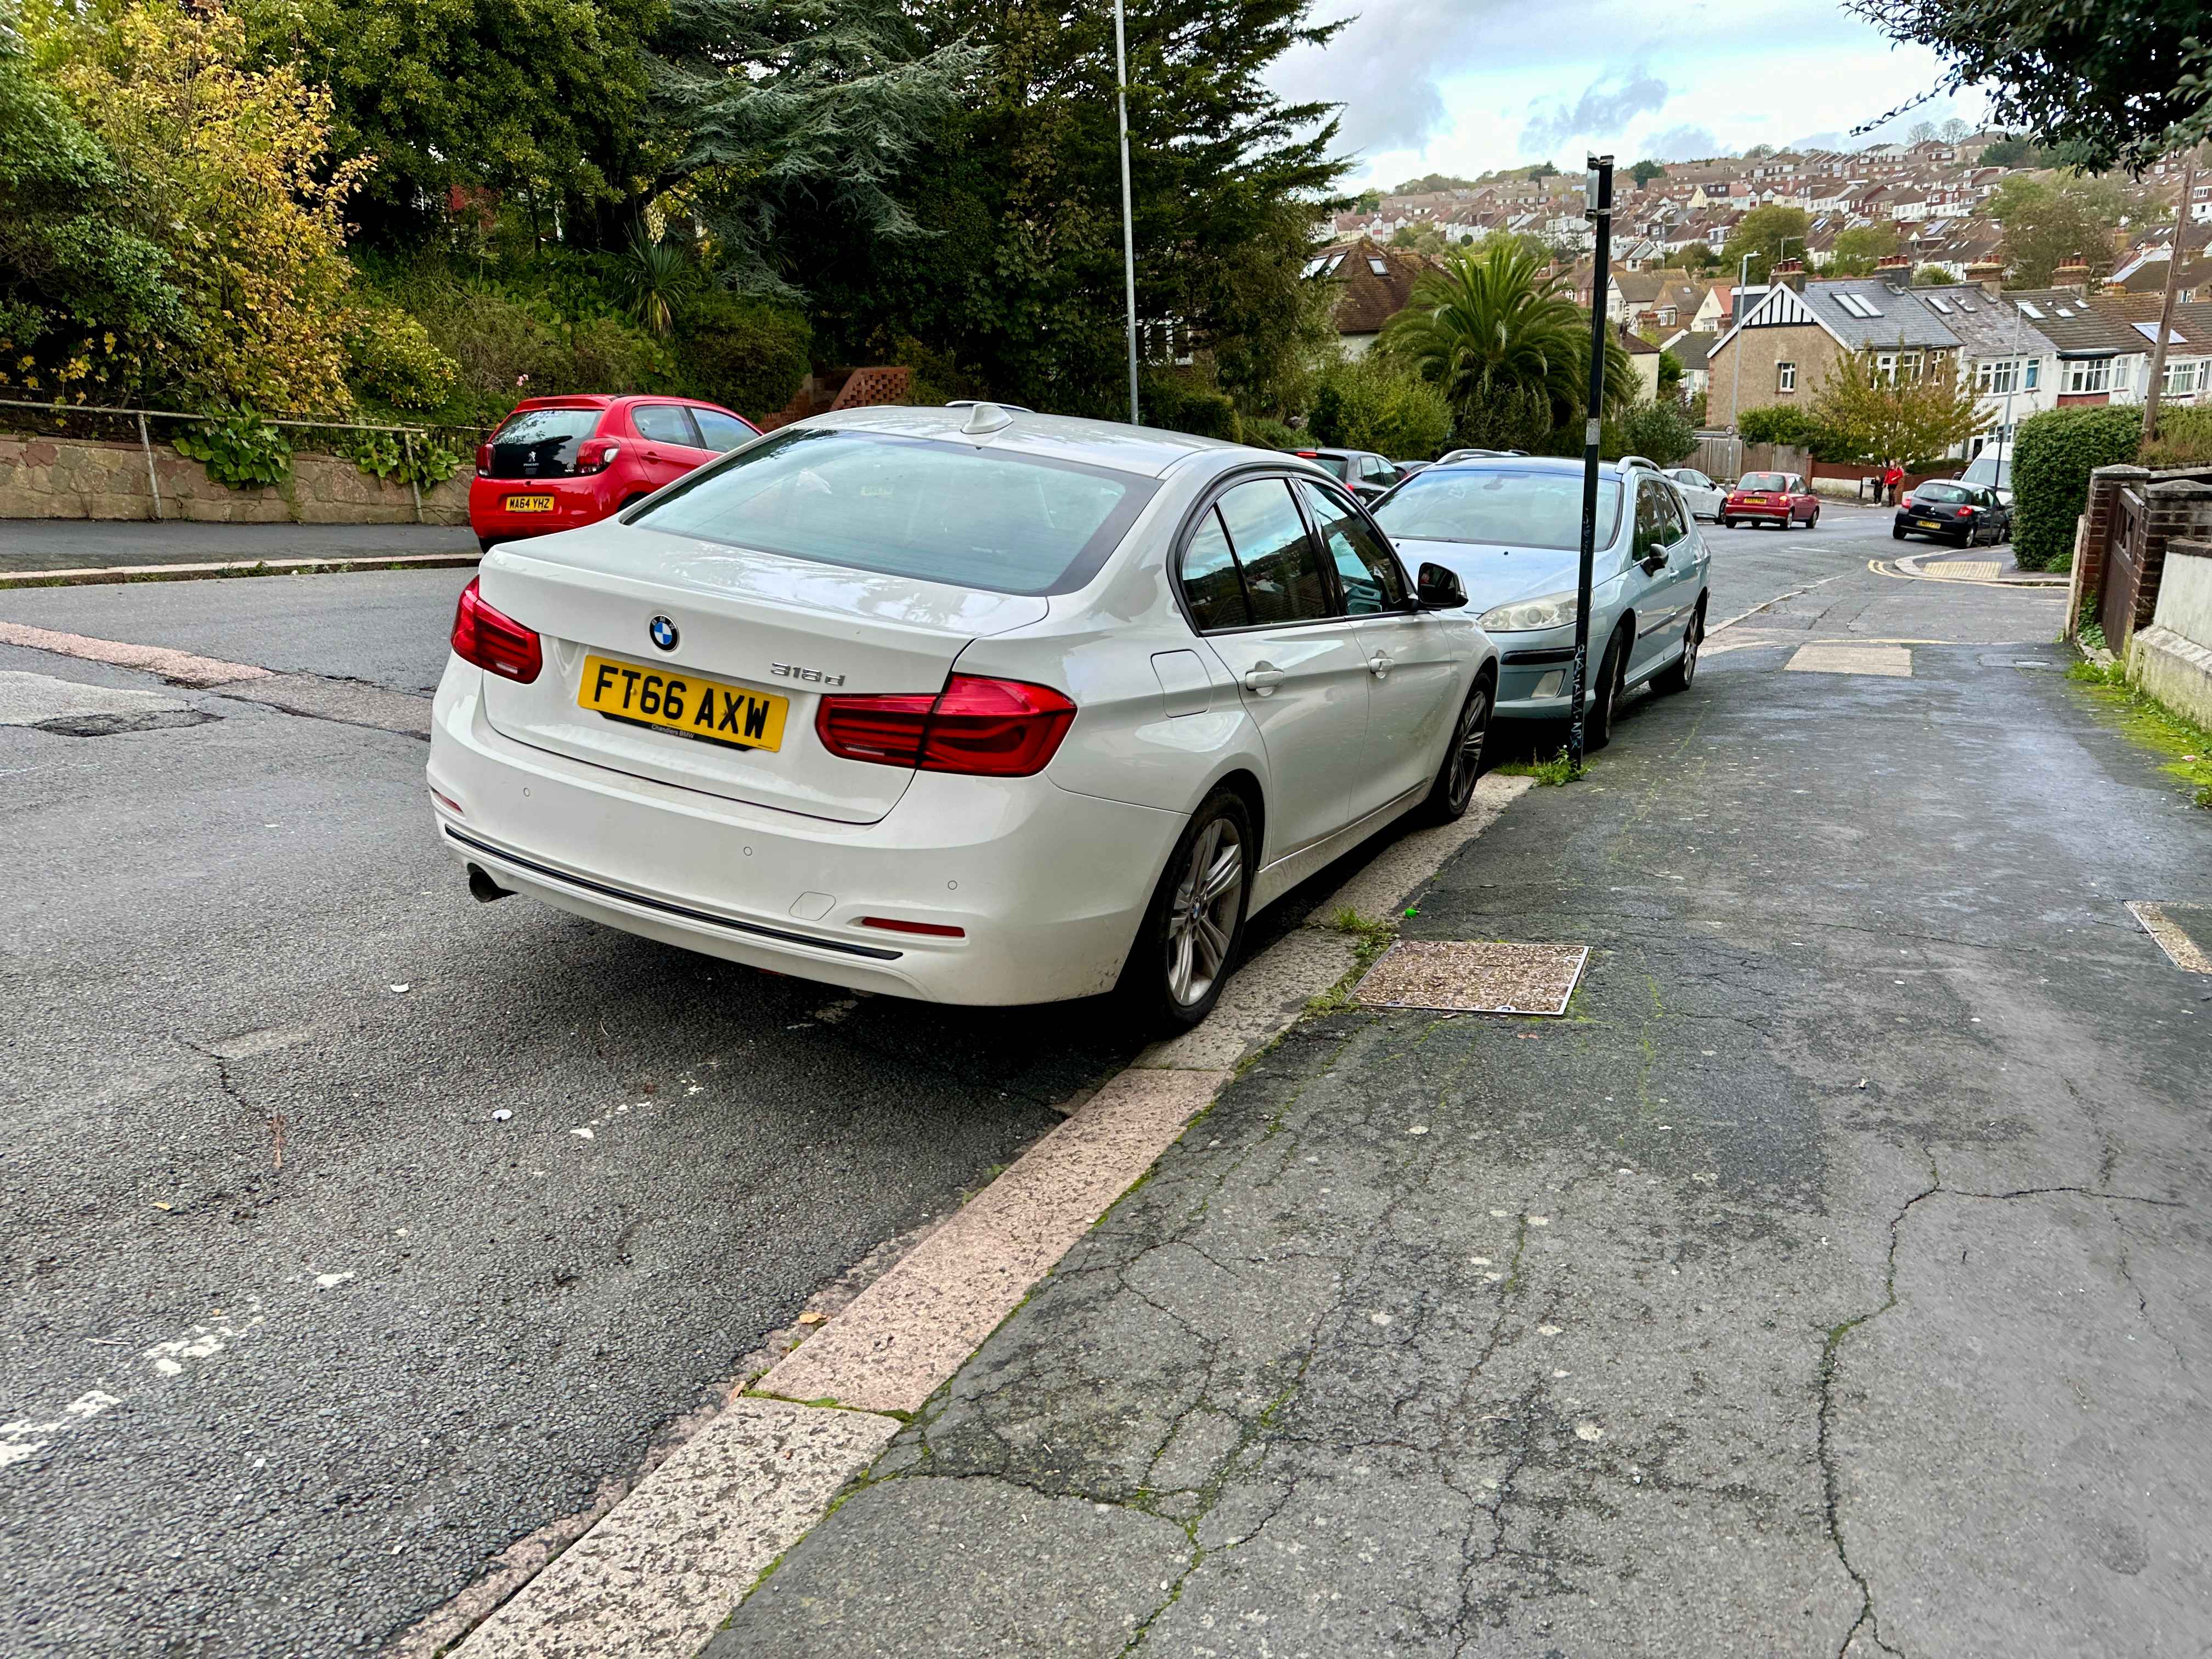 Photograph of FT66 AXW - a White BMW 3 Series parked in Hollingdean by a non-resident who uses the local area as part of their Brighton commute. The third of seven photographs supplied by the residents of Hollingdean.